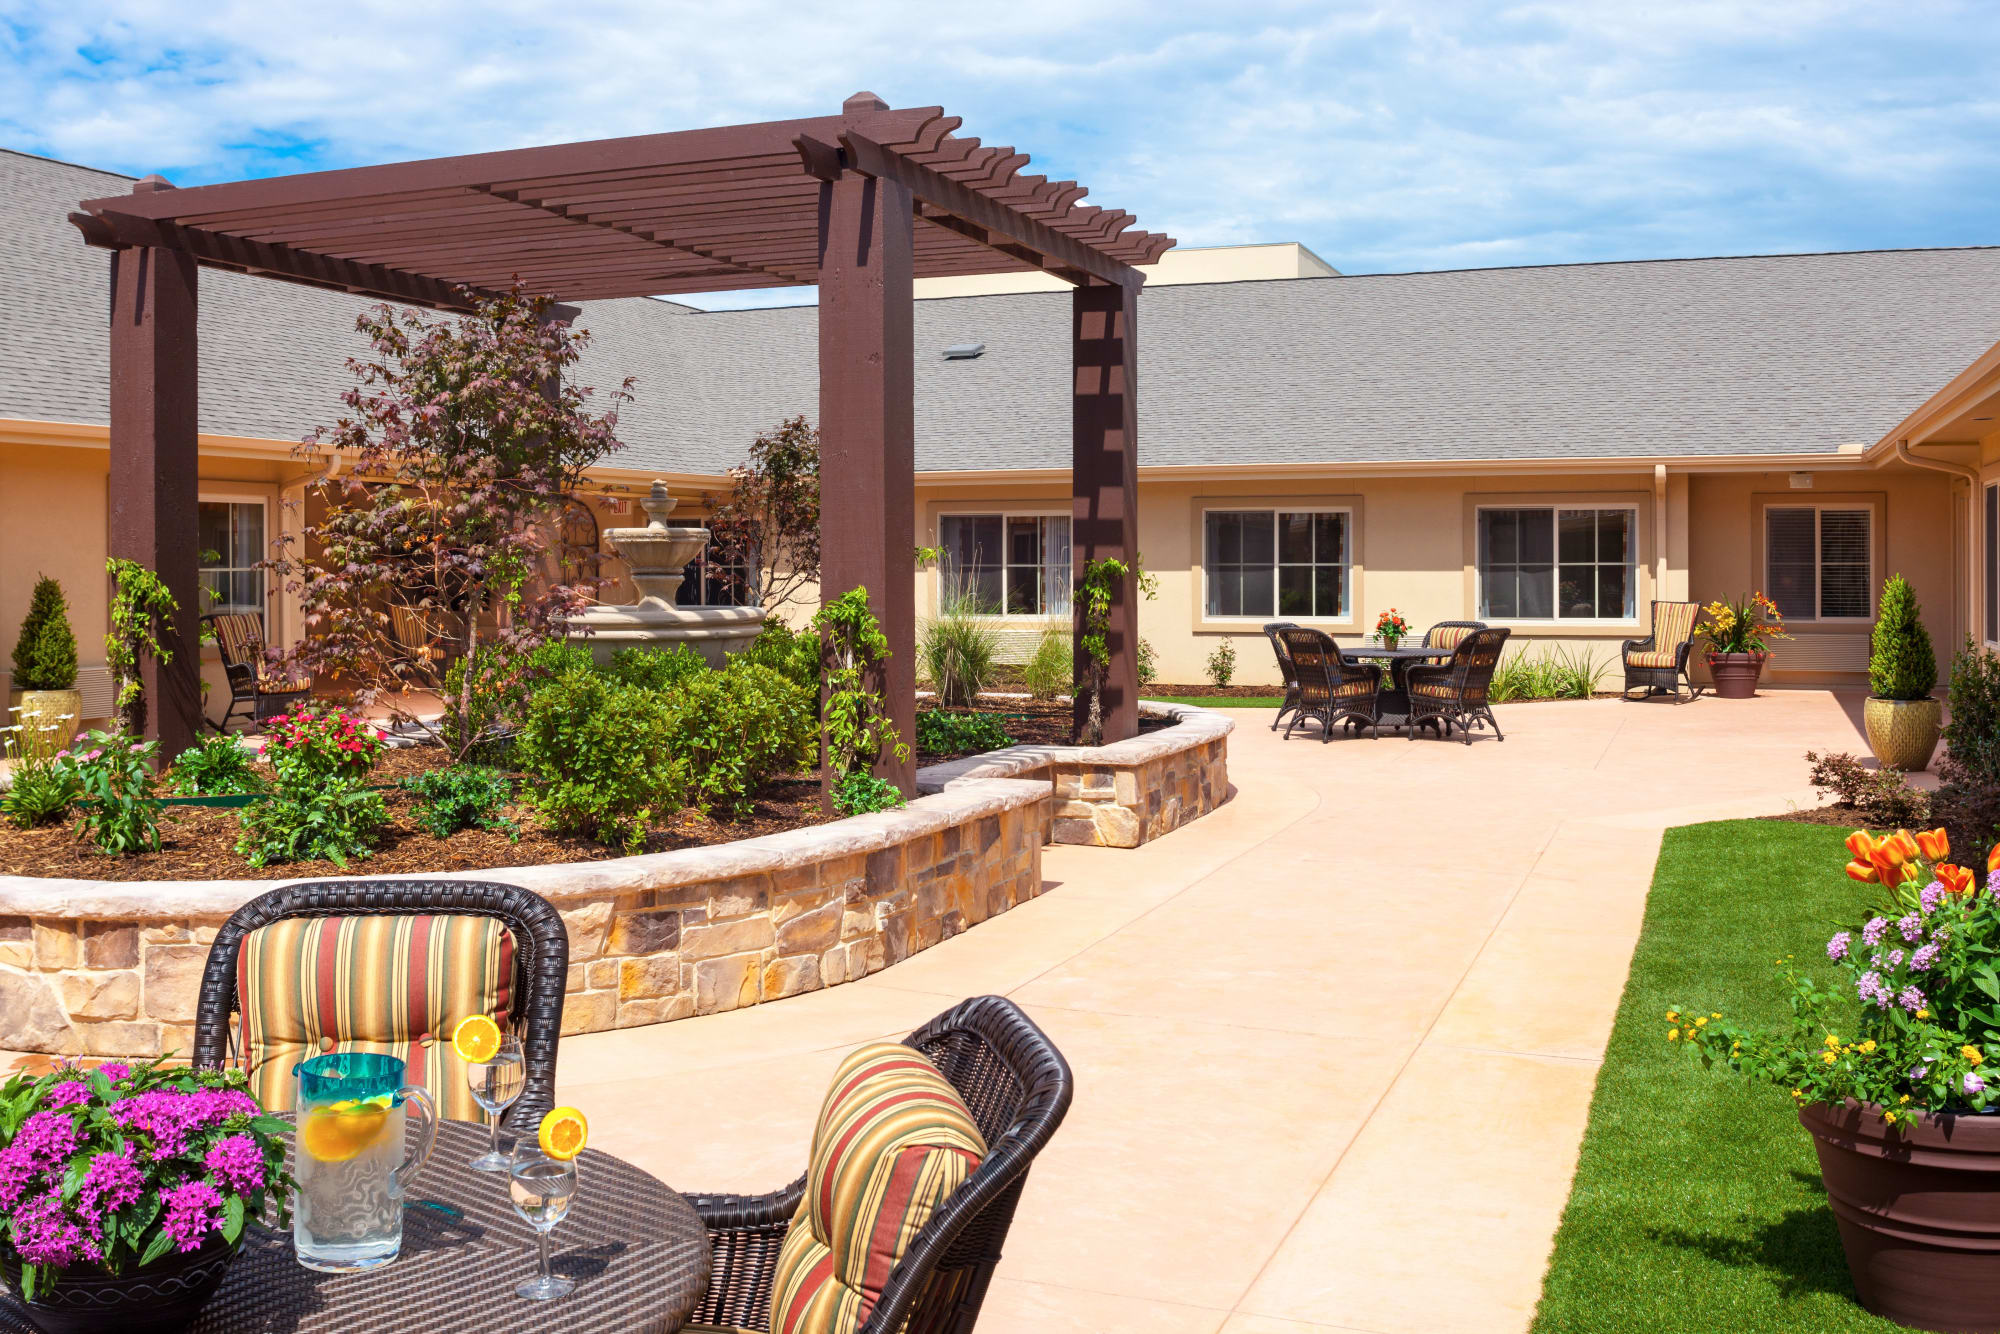 Paved patio with a community garden at Riverside Oxford Memory Care in Ft. Worth, Texas